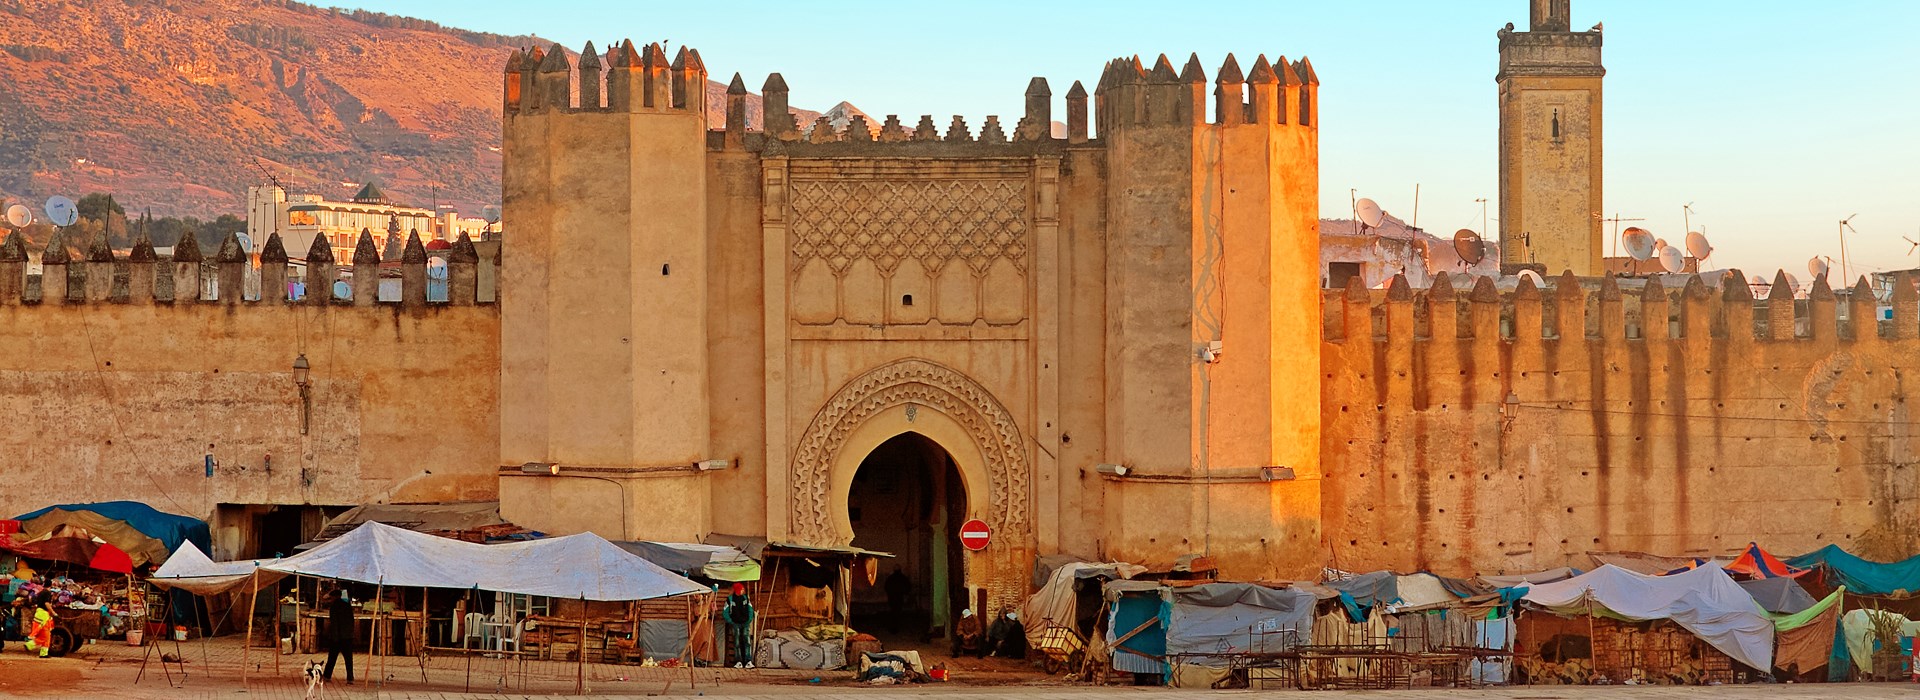 3 Days From Fes To Marrakech Desert Tours